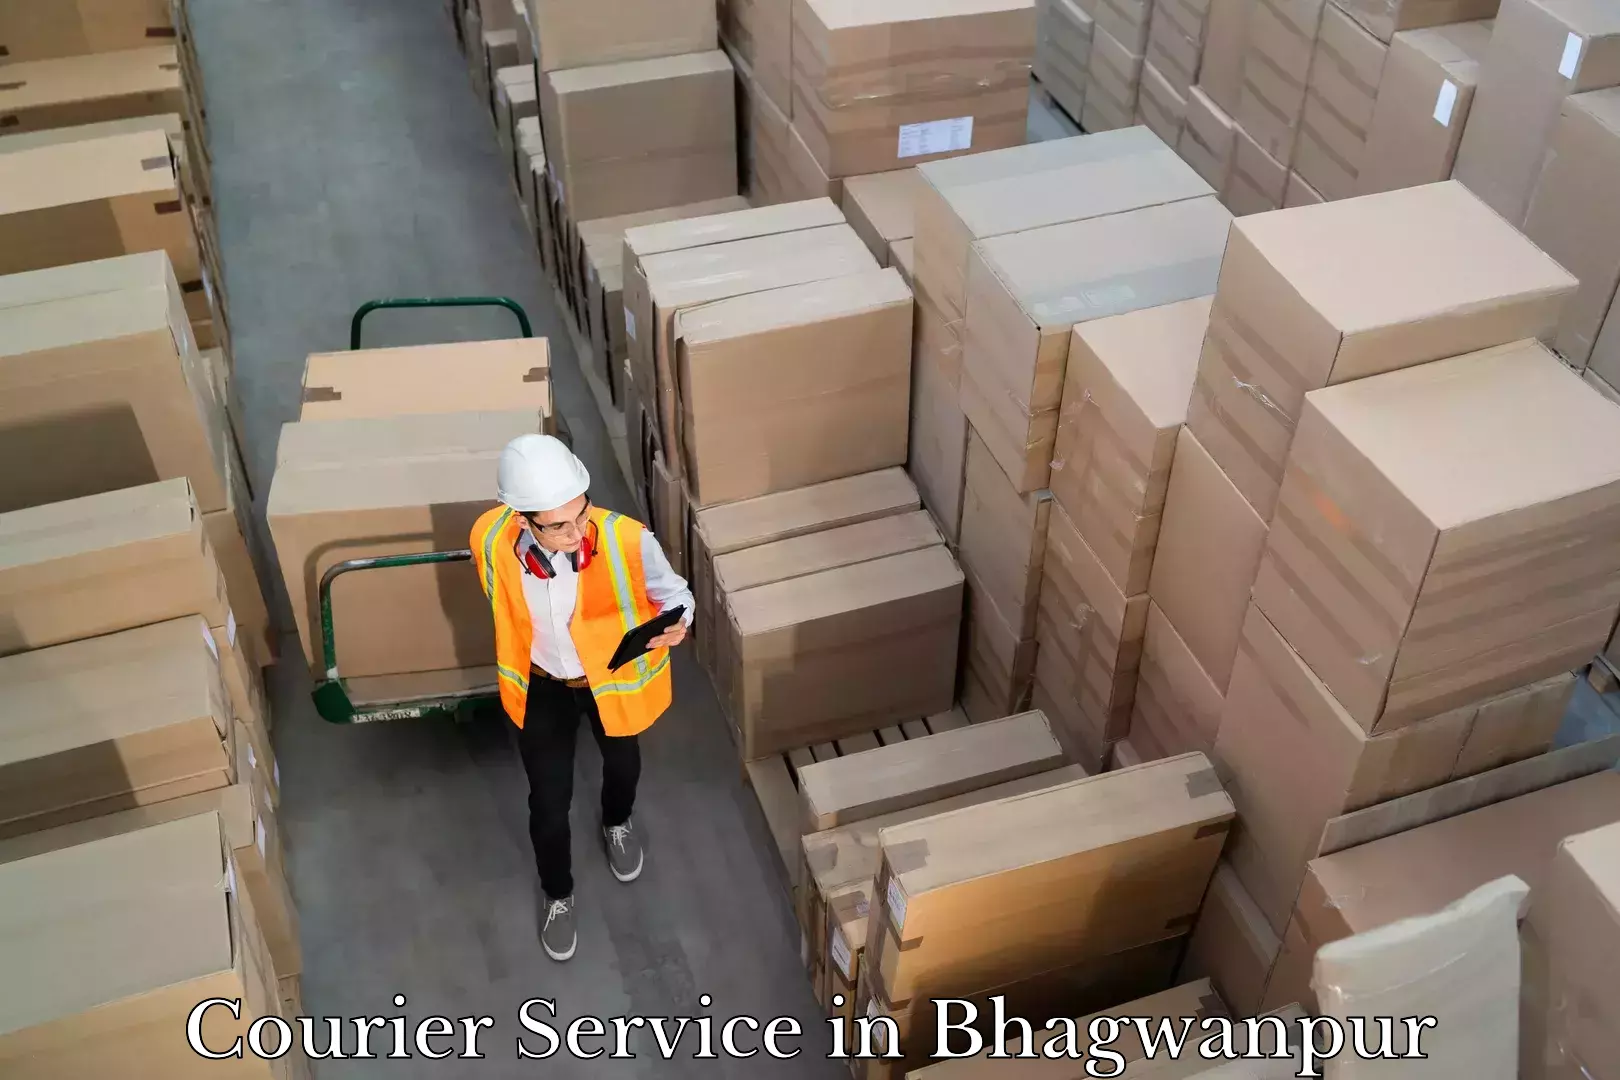 Sustainable shipping practices in Bhagwanpur